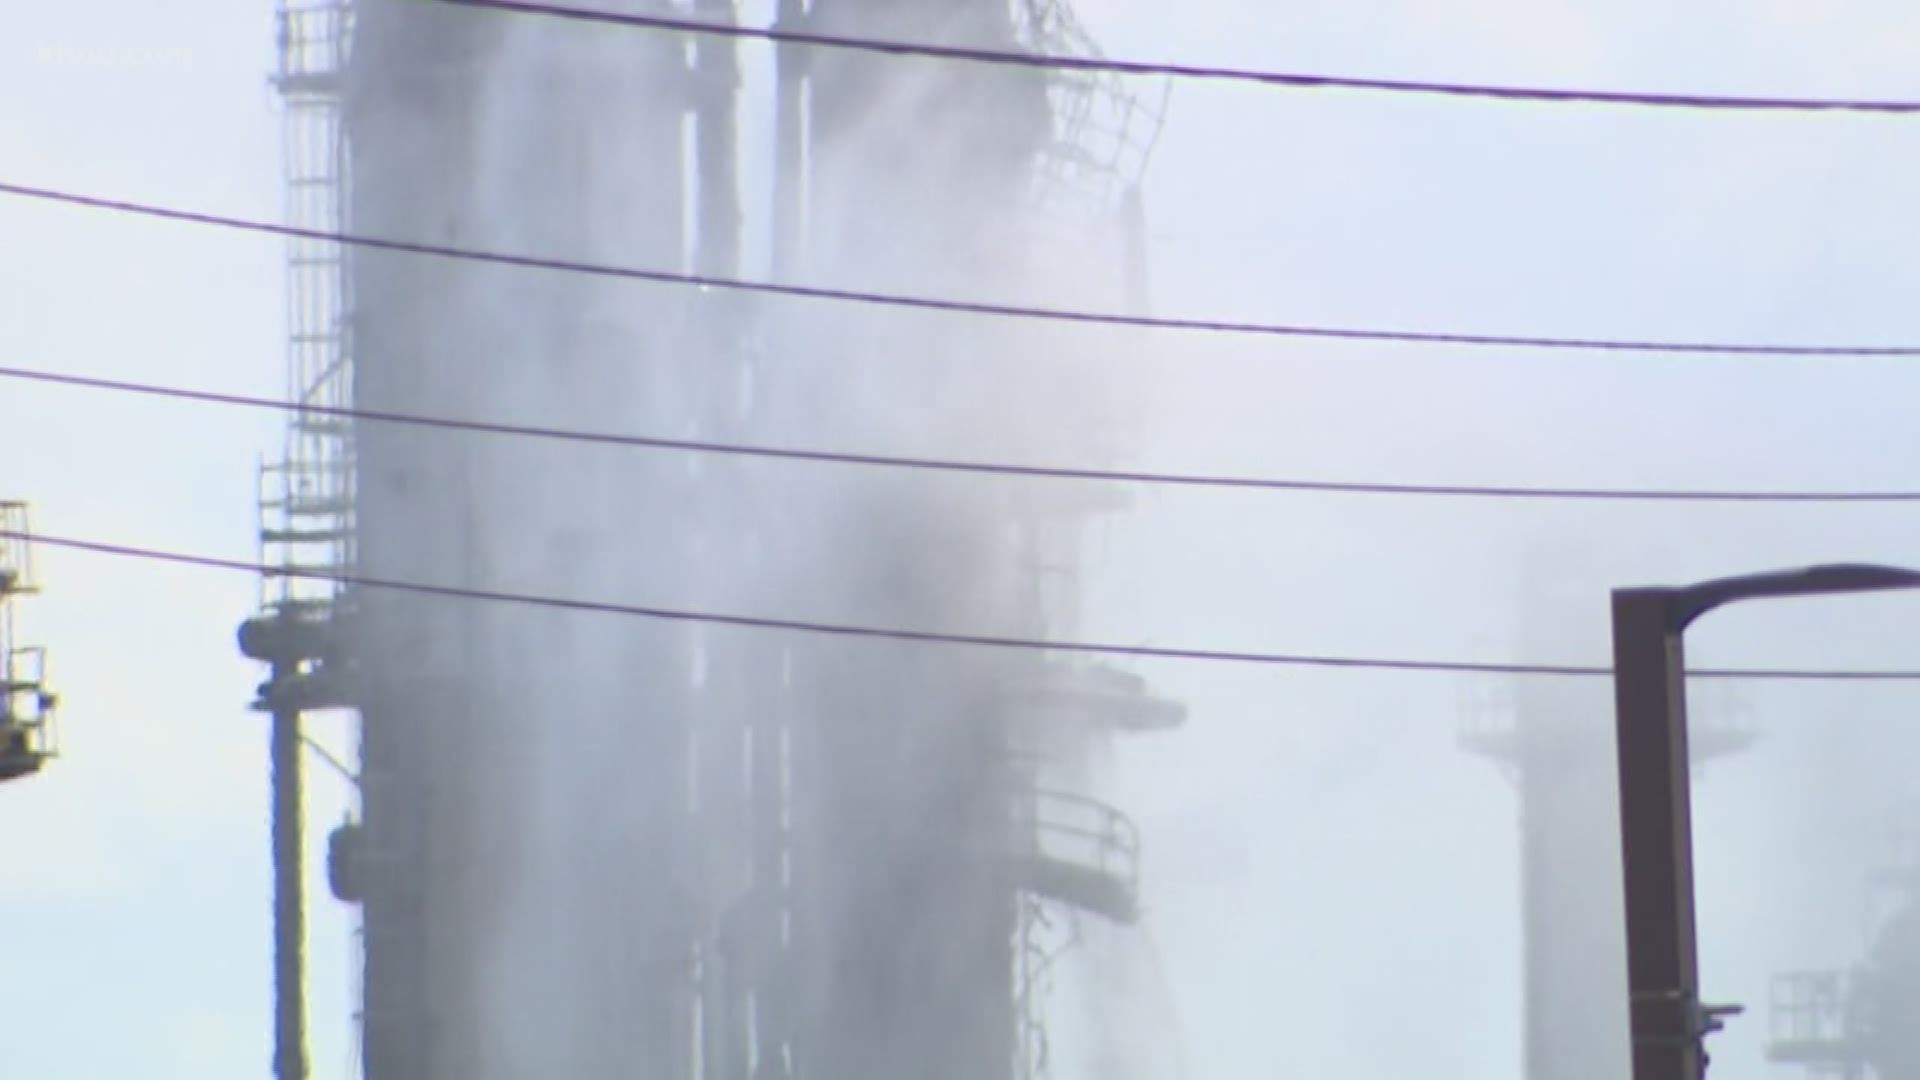 It took nearly 24 hours to put out the flames at the ExxonMobil plant in Baytown. What follows is mounting legal troubles from Harris County to the fire marshal's office.